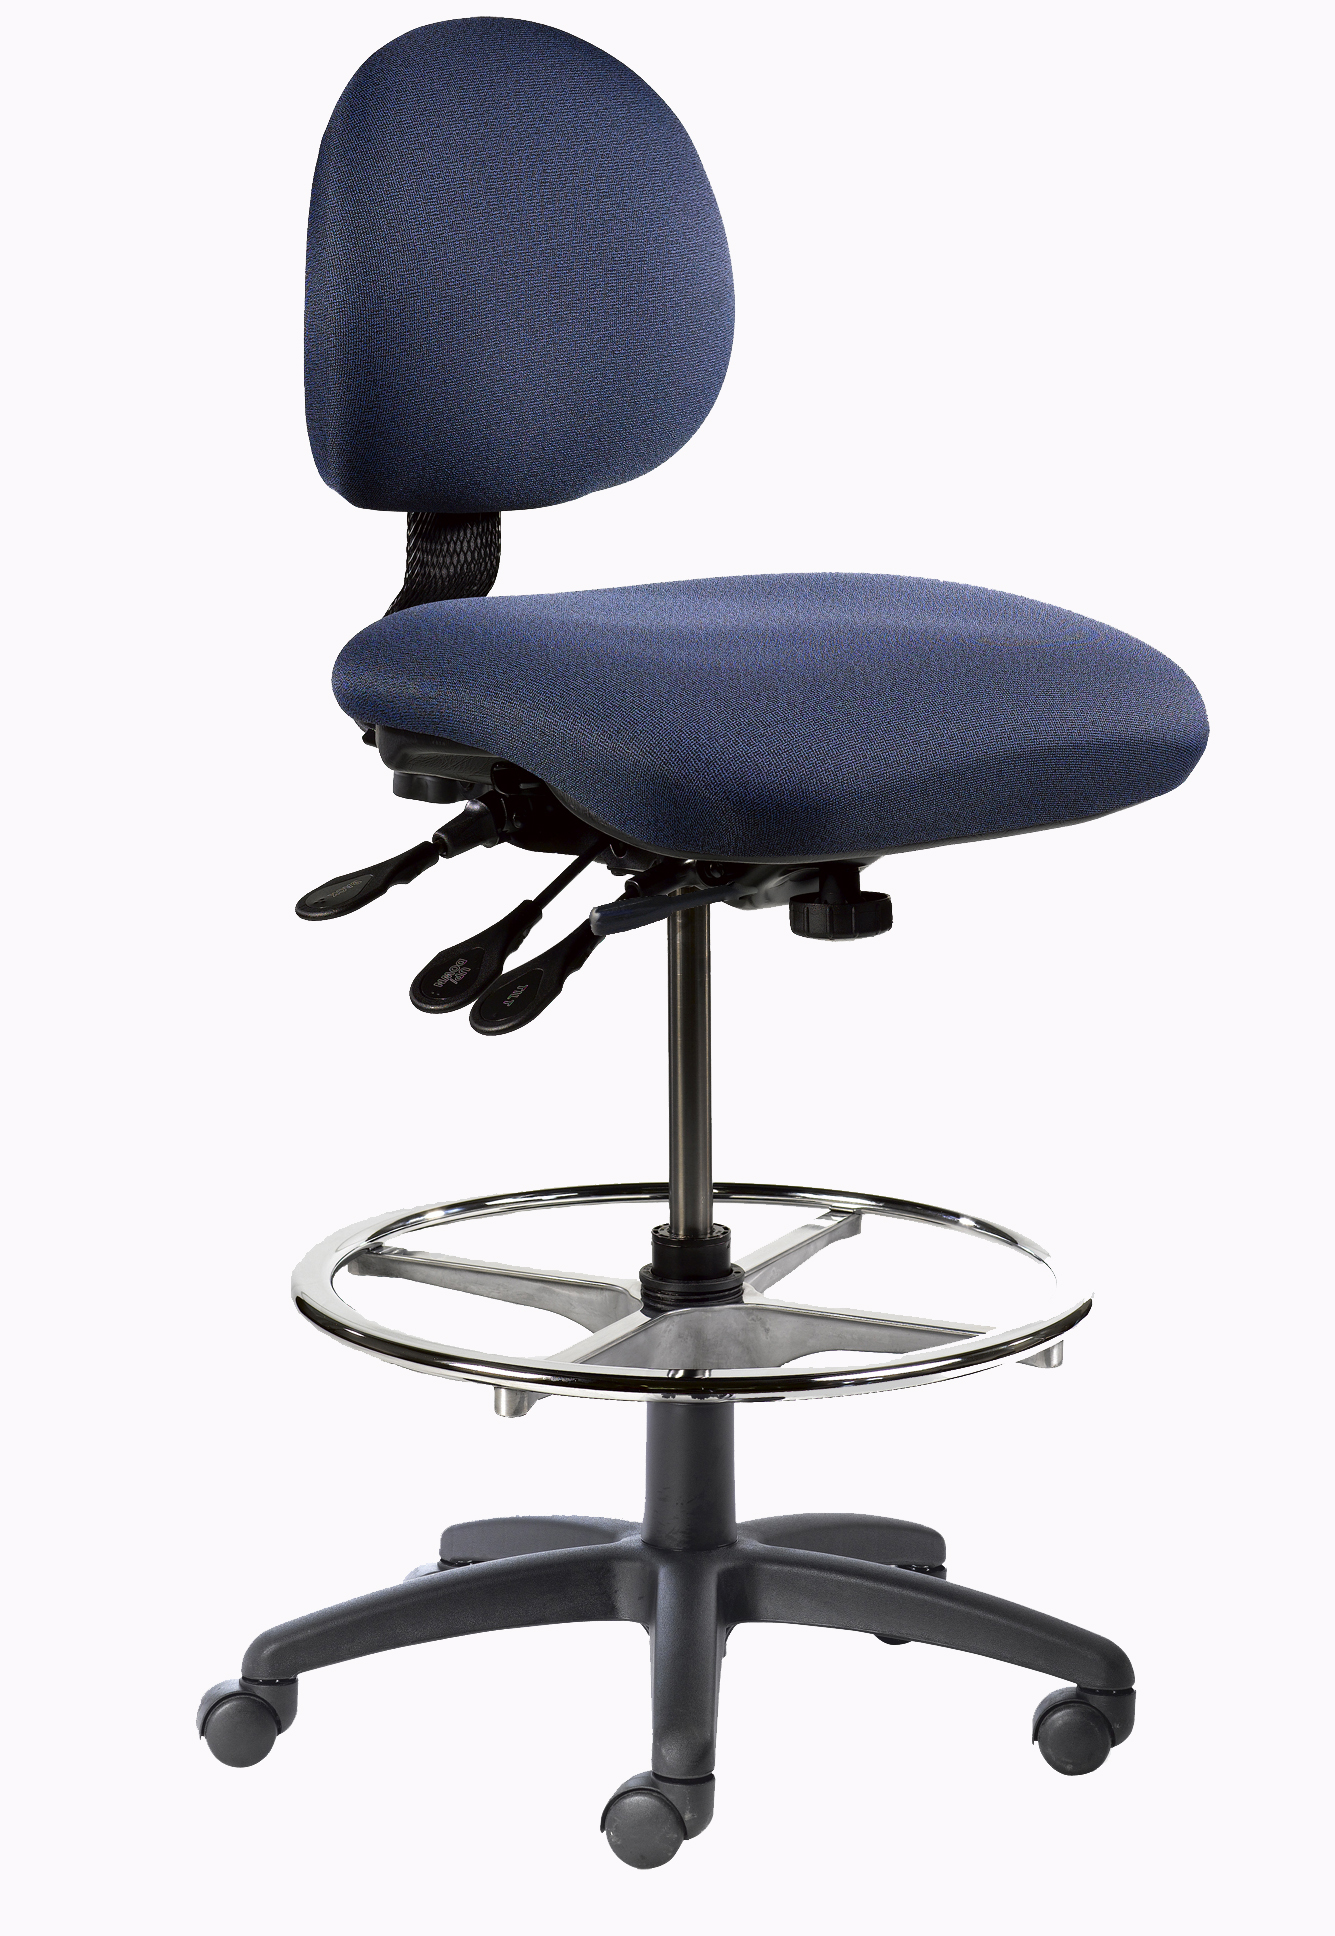 counter-height office chair